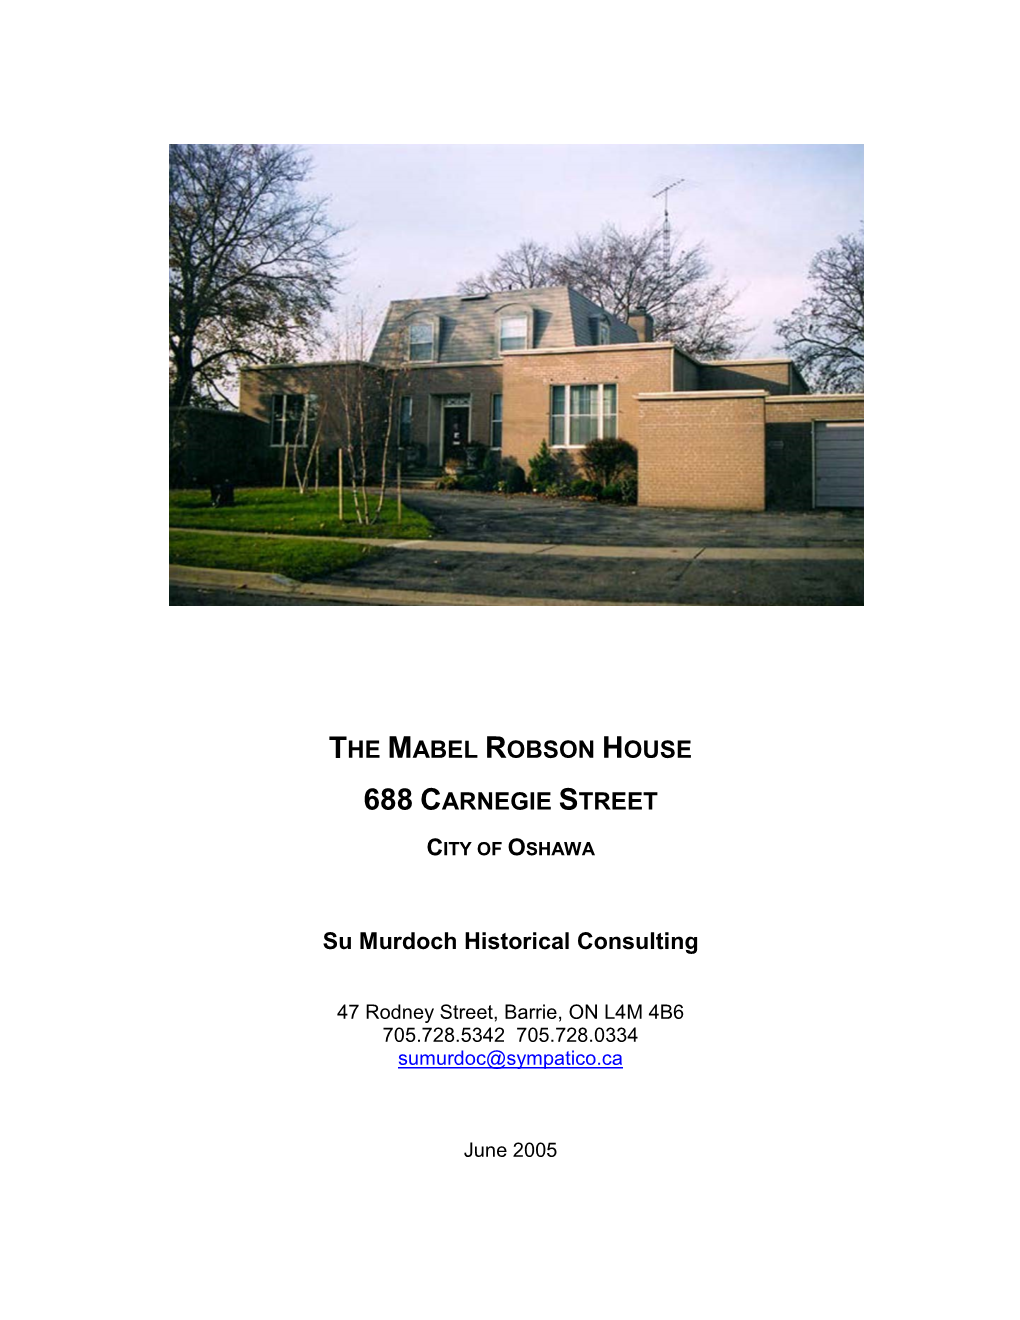 688 Carnegie Avenue (Mabel Robson House)